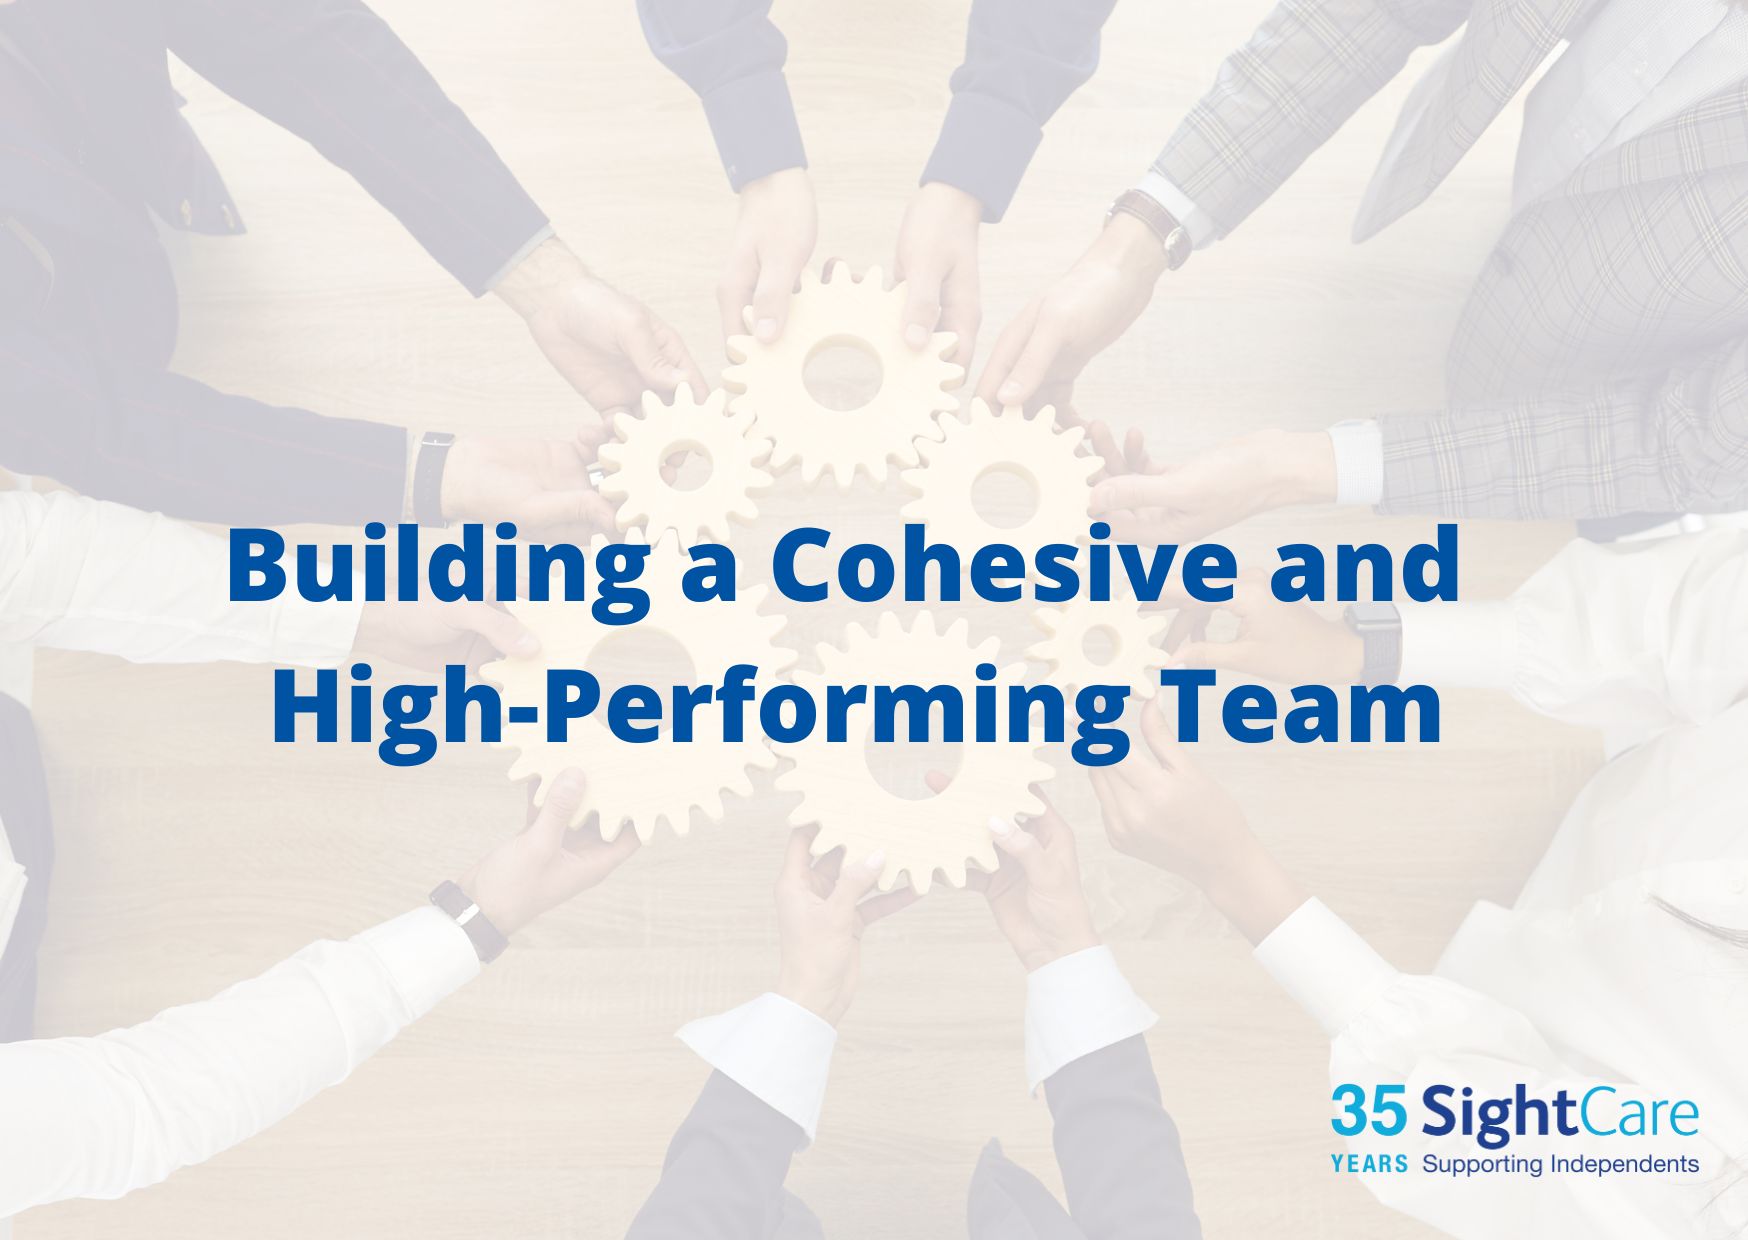 Building a Cohesive and High-Performing Team